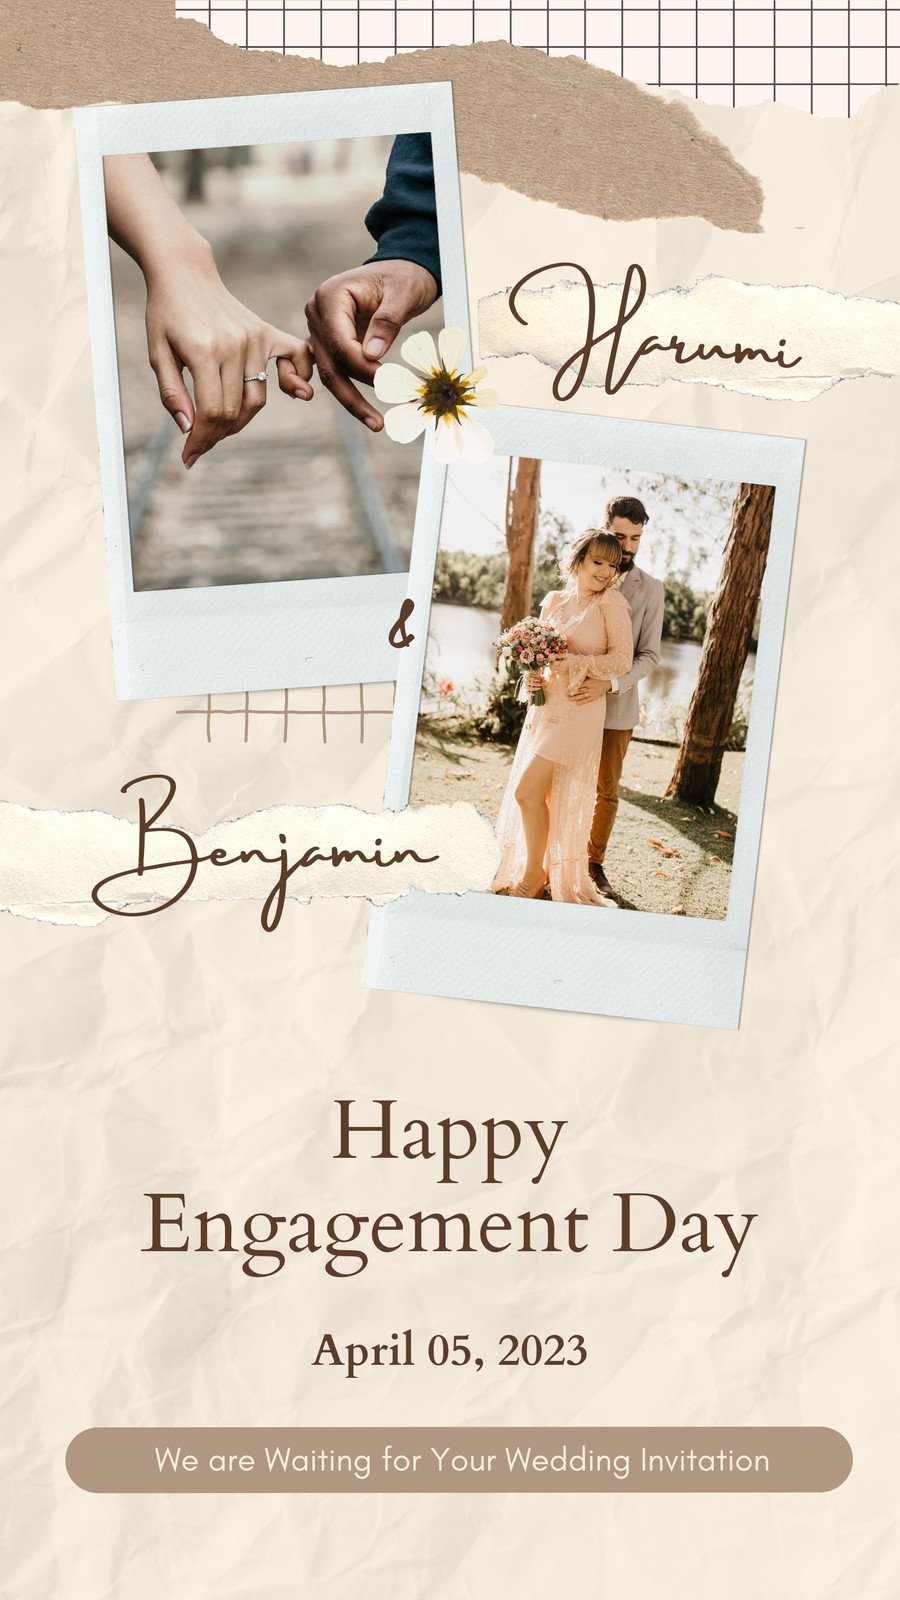 Free and customizable engagement templates